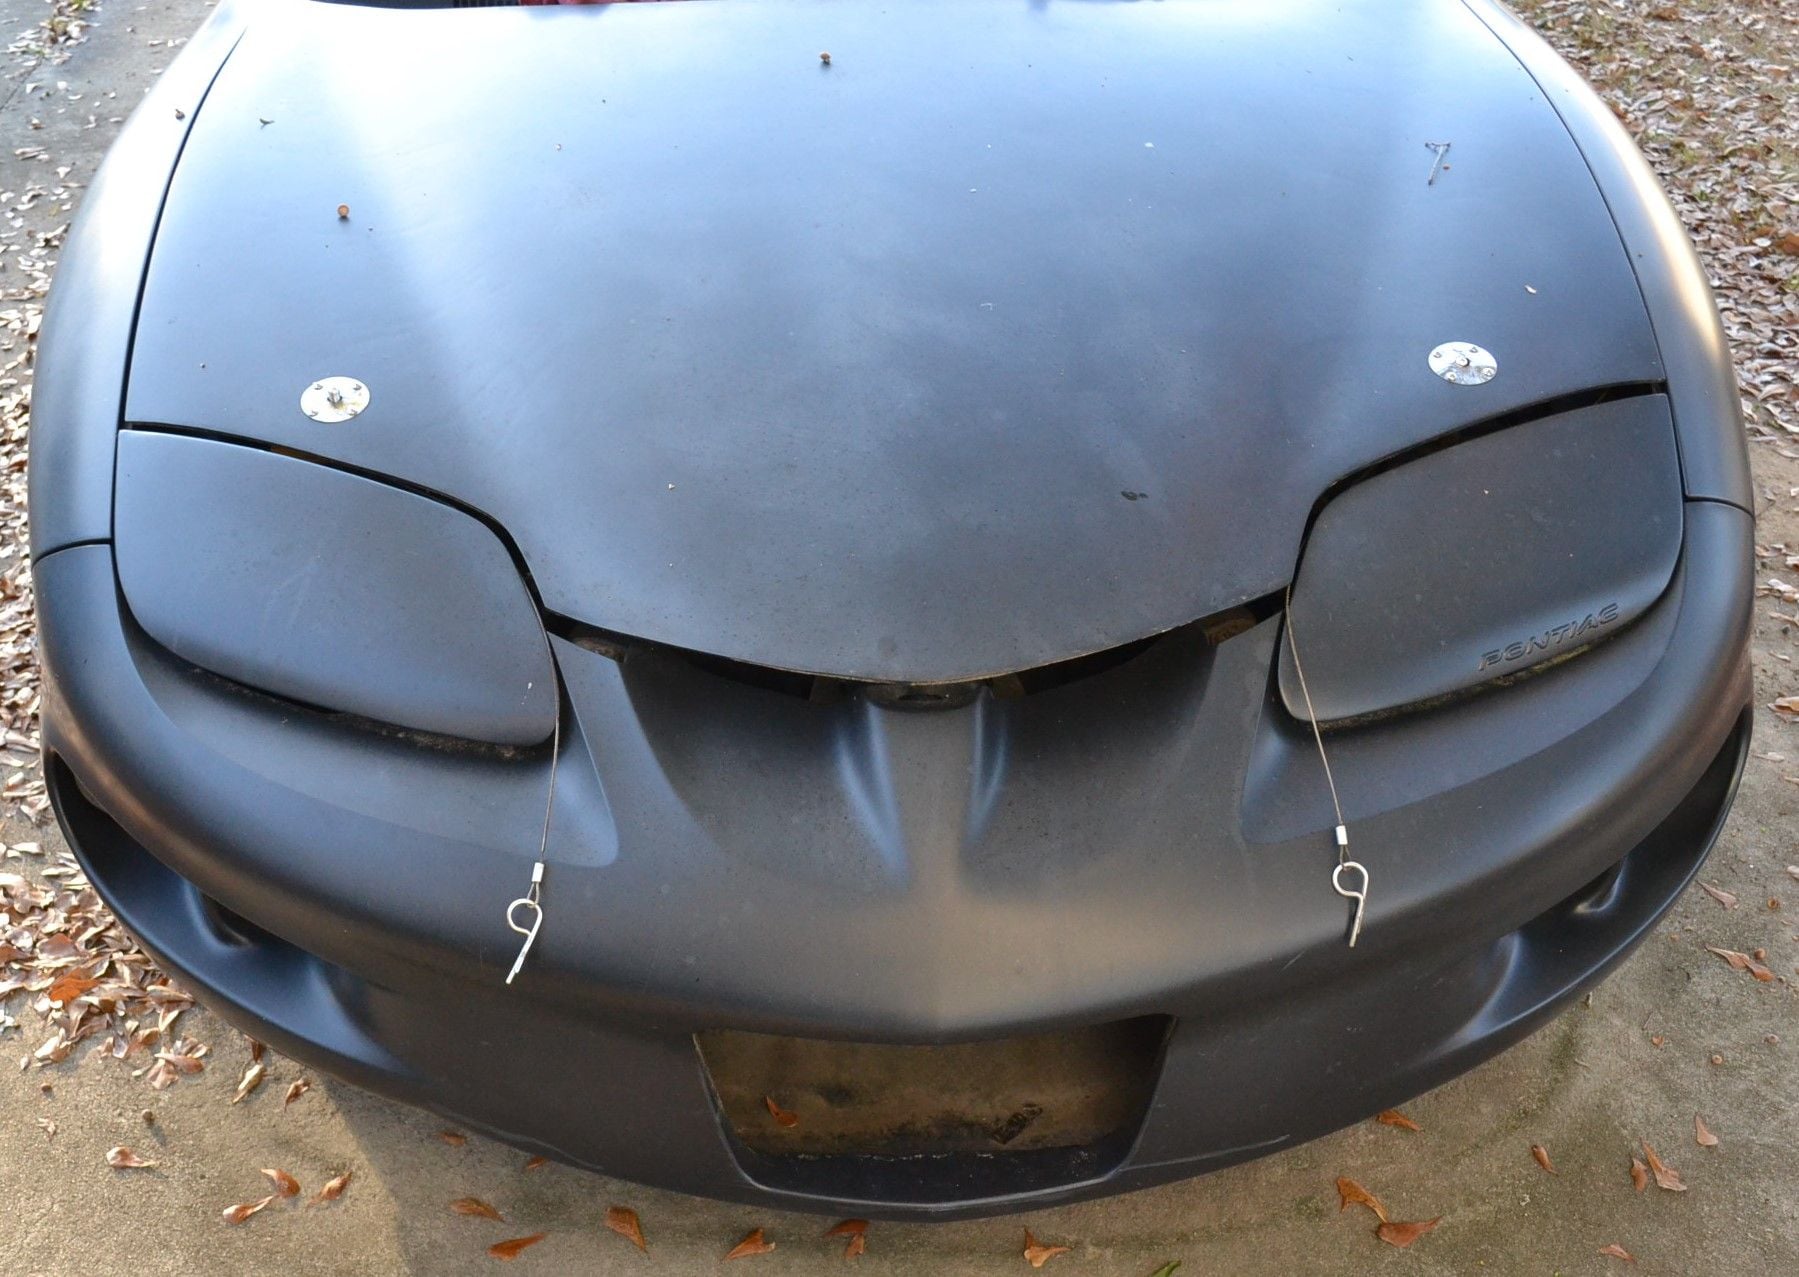 1999 Pontiac Firebird - 1999 Formula Hardtop project needs finishing SOLD - Used - VIN 2G2FV22G0X2228854 - 114,000 Miles - 8 cyl - 2WD - Manual - Coupe - Black - Chattahoochee, FL 32324, United States